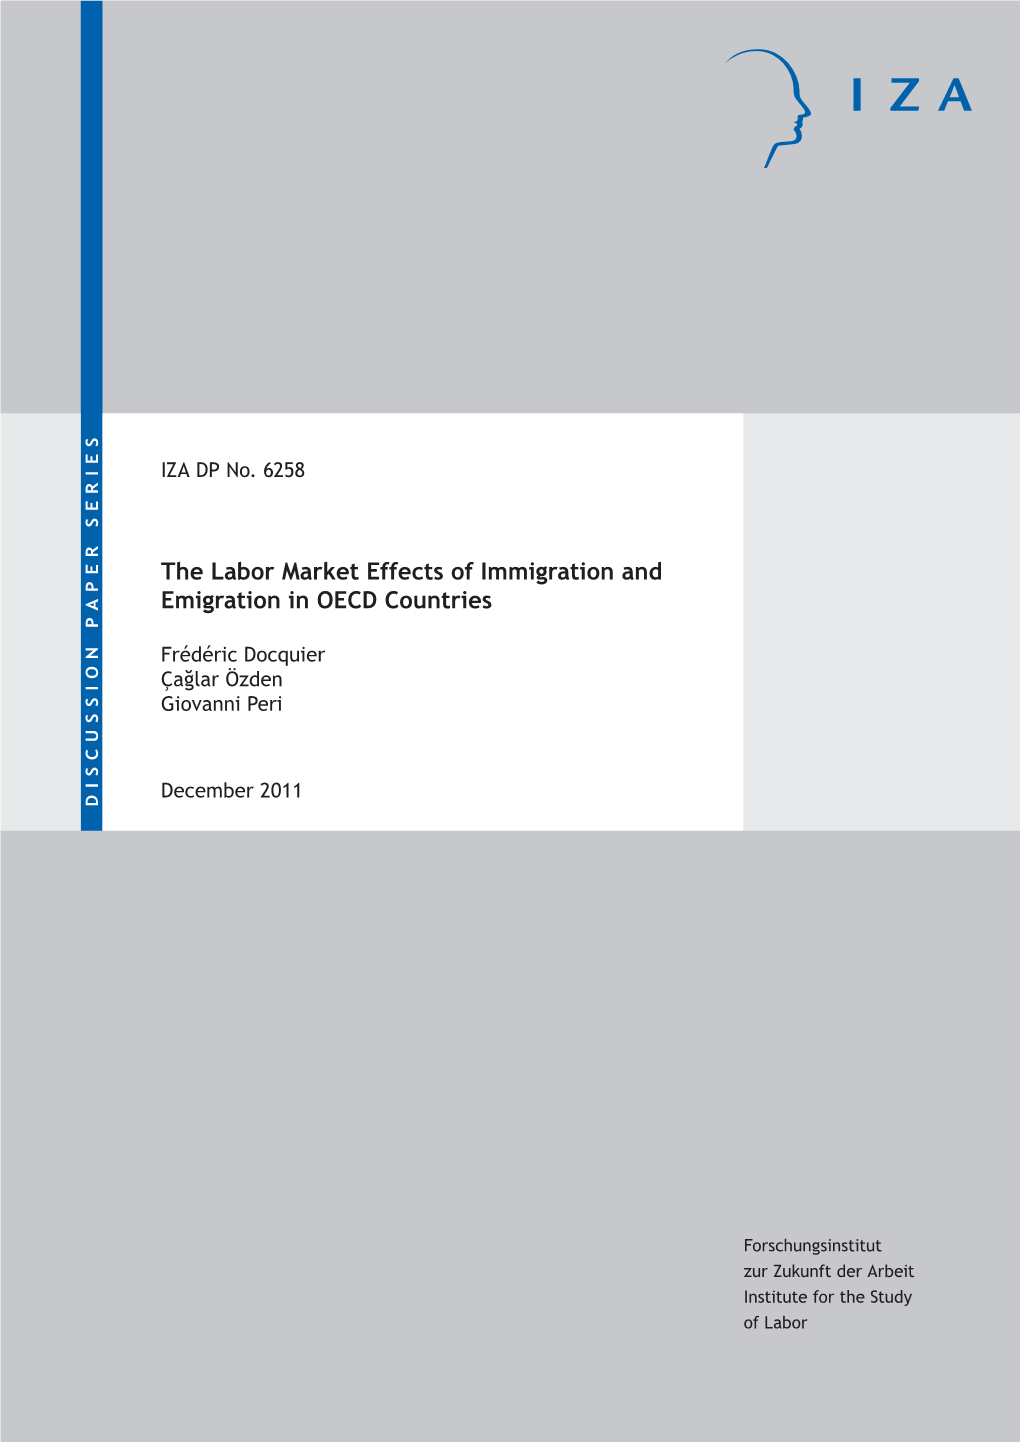 The Labor Market Effects of Immigration and Emigration in OECD Countries